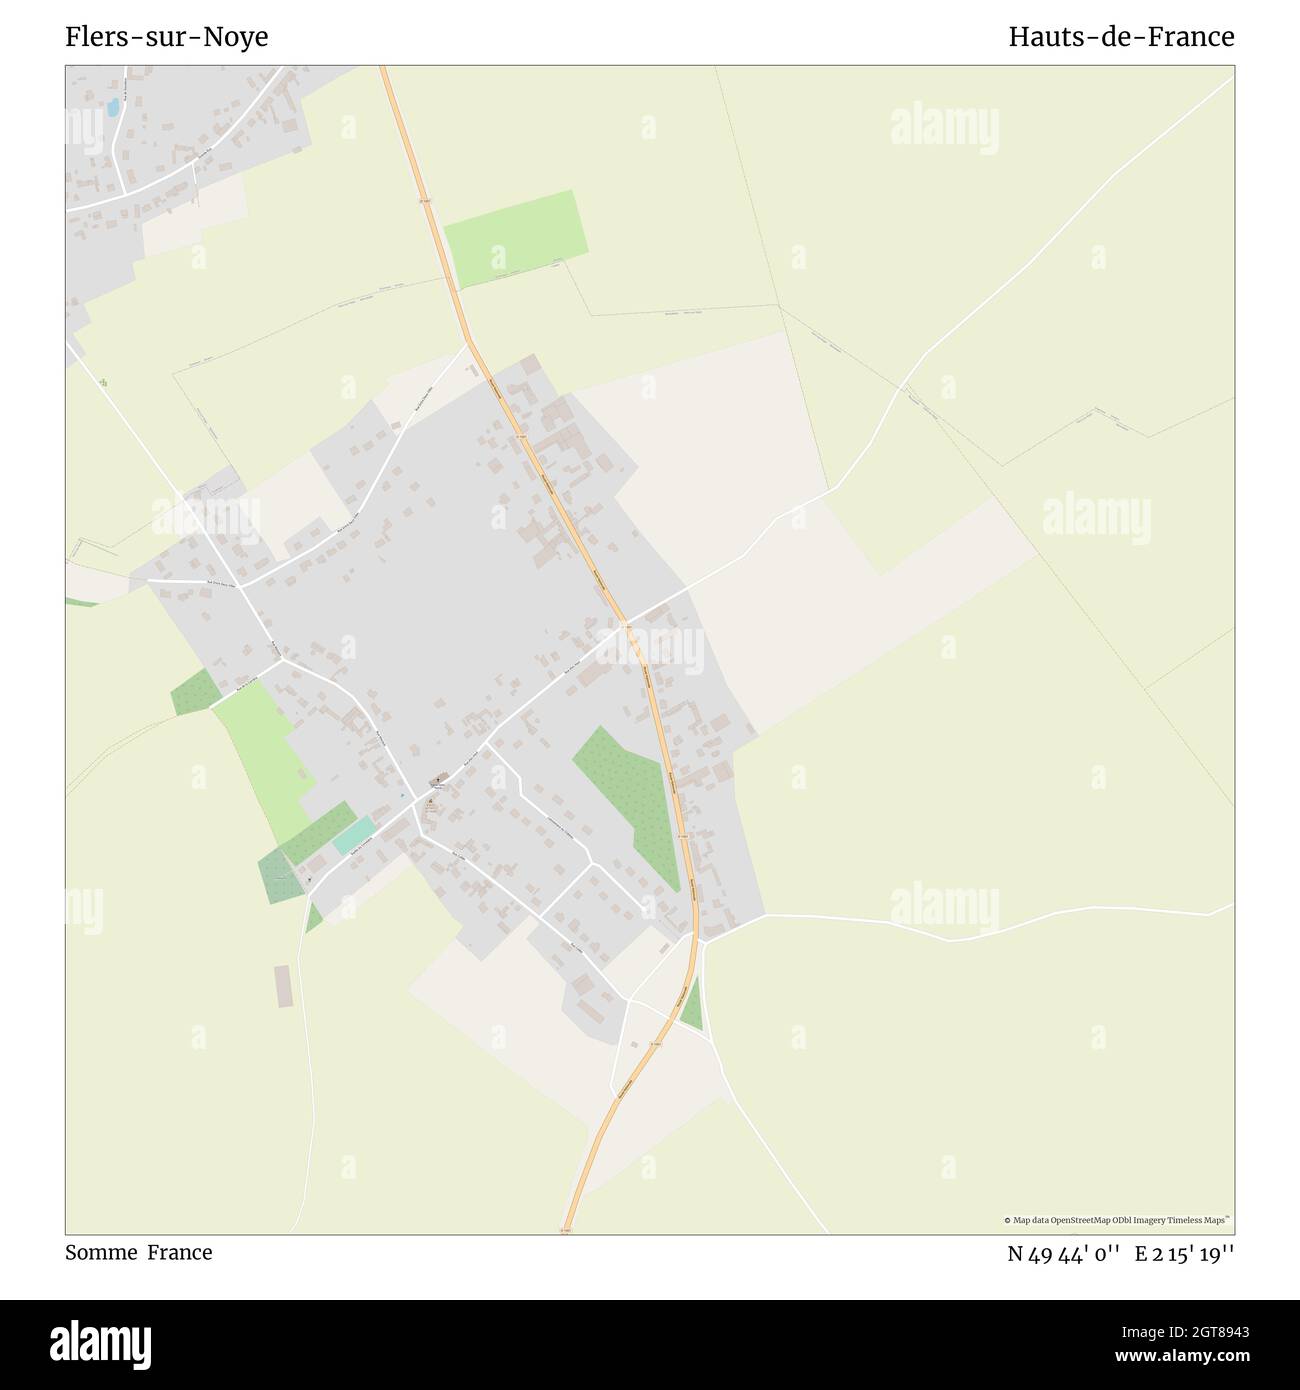 Flers-sur-Noye, Somme, France, Hauts-de-France, N 49 44' 0'', E 2 15' 19'', map, Timeless Map published in 2021. Travelers, explorers and adventurers like Florence Nightingale, David Livingstone, Ernest Shackleton, Lewis and Clark and Sherlock Holmes relied on maps to plan travels to the world's most remote corners, Timeless Maps is mapping most locations on the globe, showing the achievement of great dreams Stock Photo